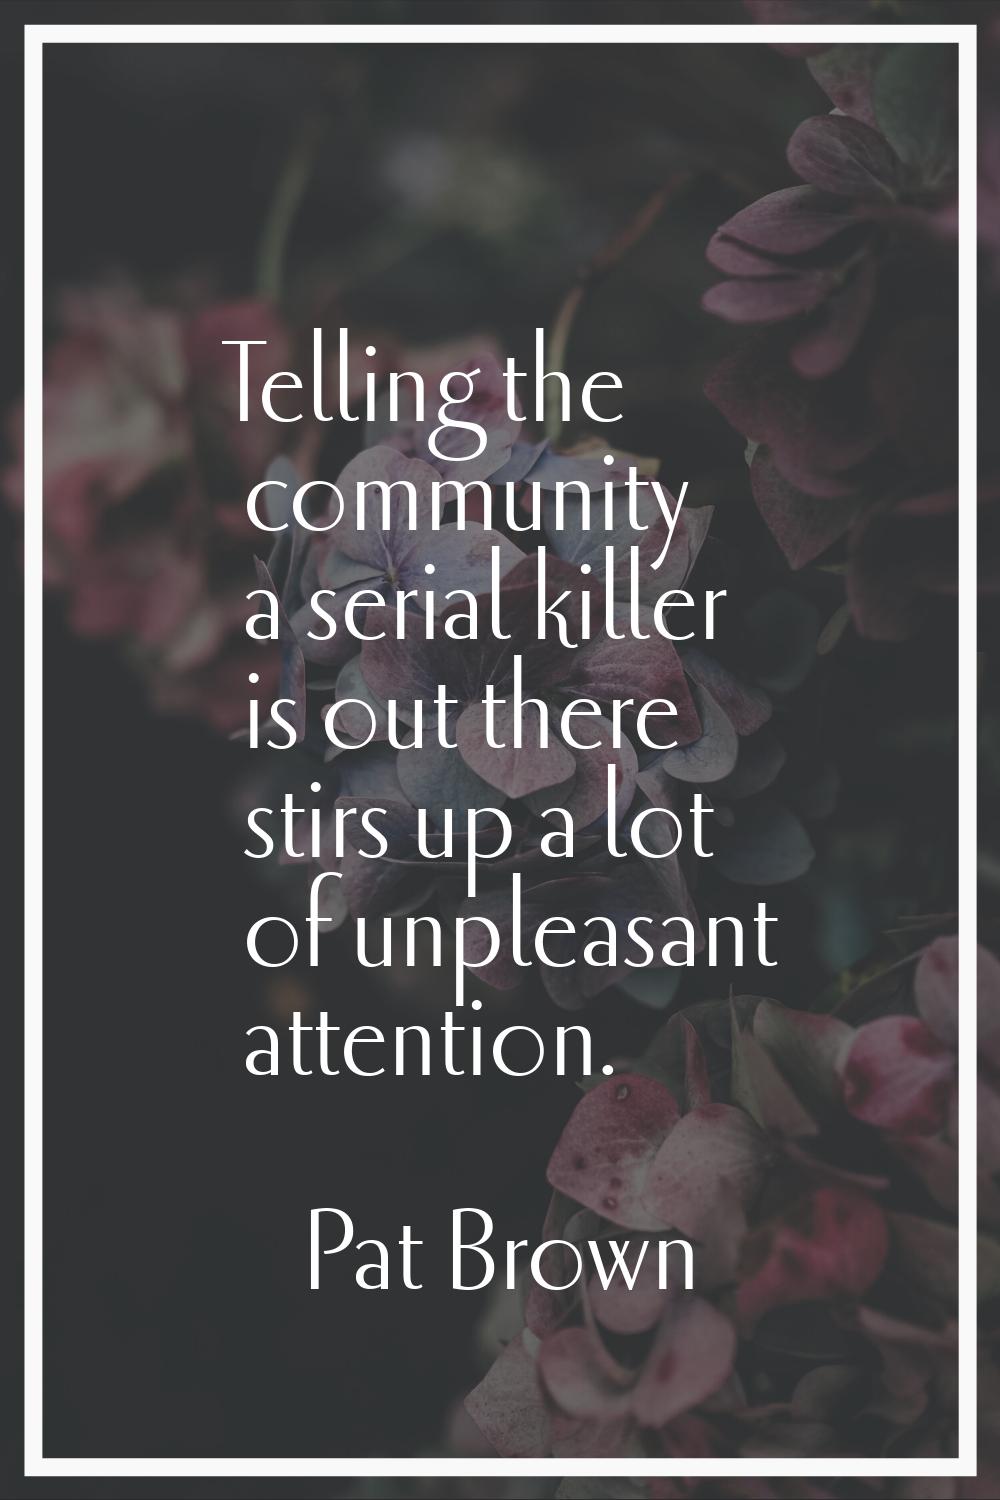 Telling the community a serial killer is out there stirs up a lot of unpleasant attention.